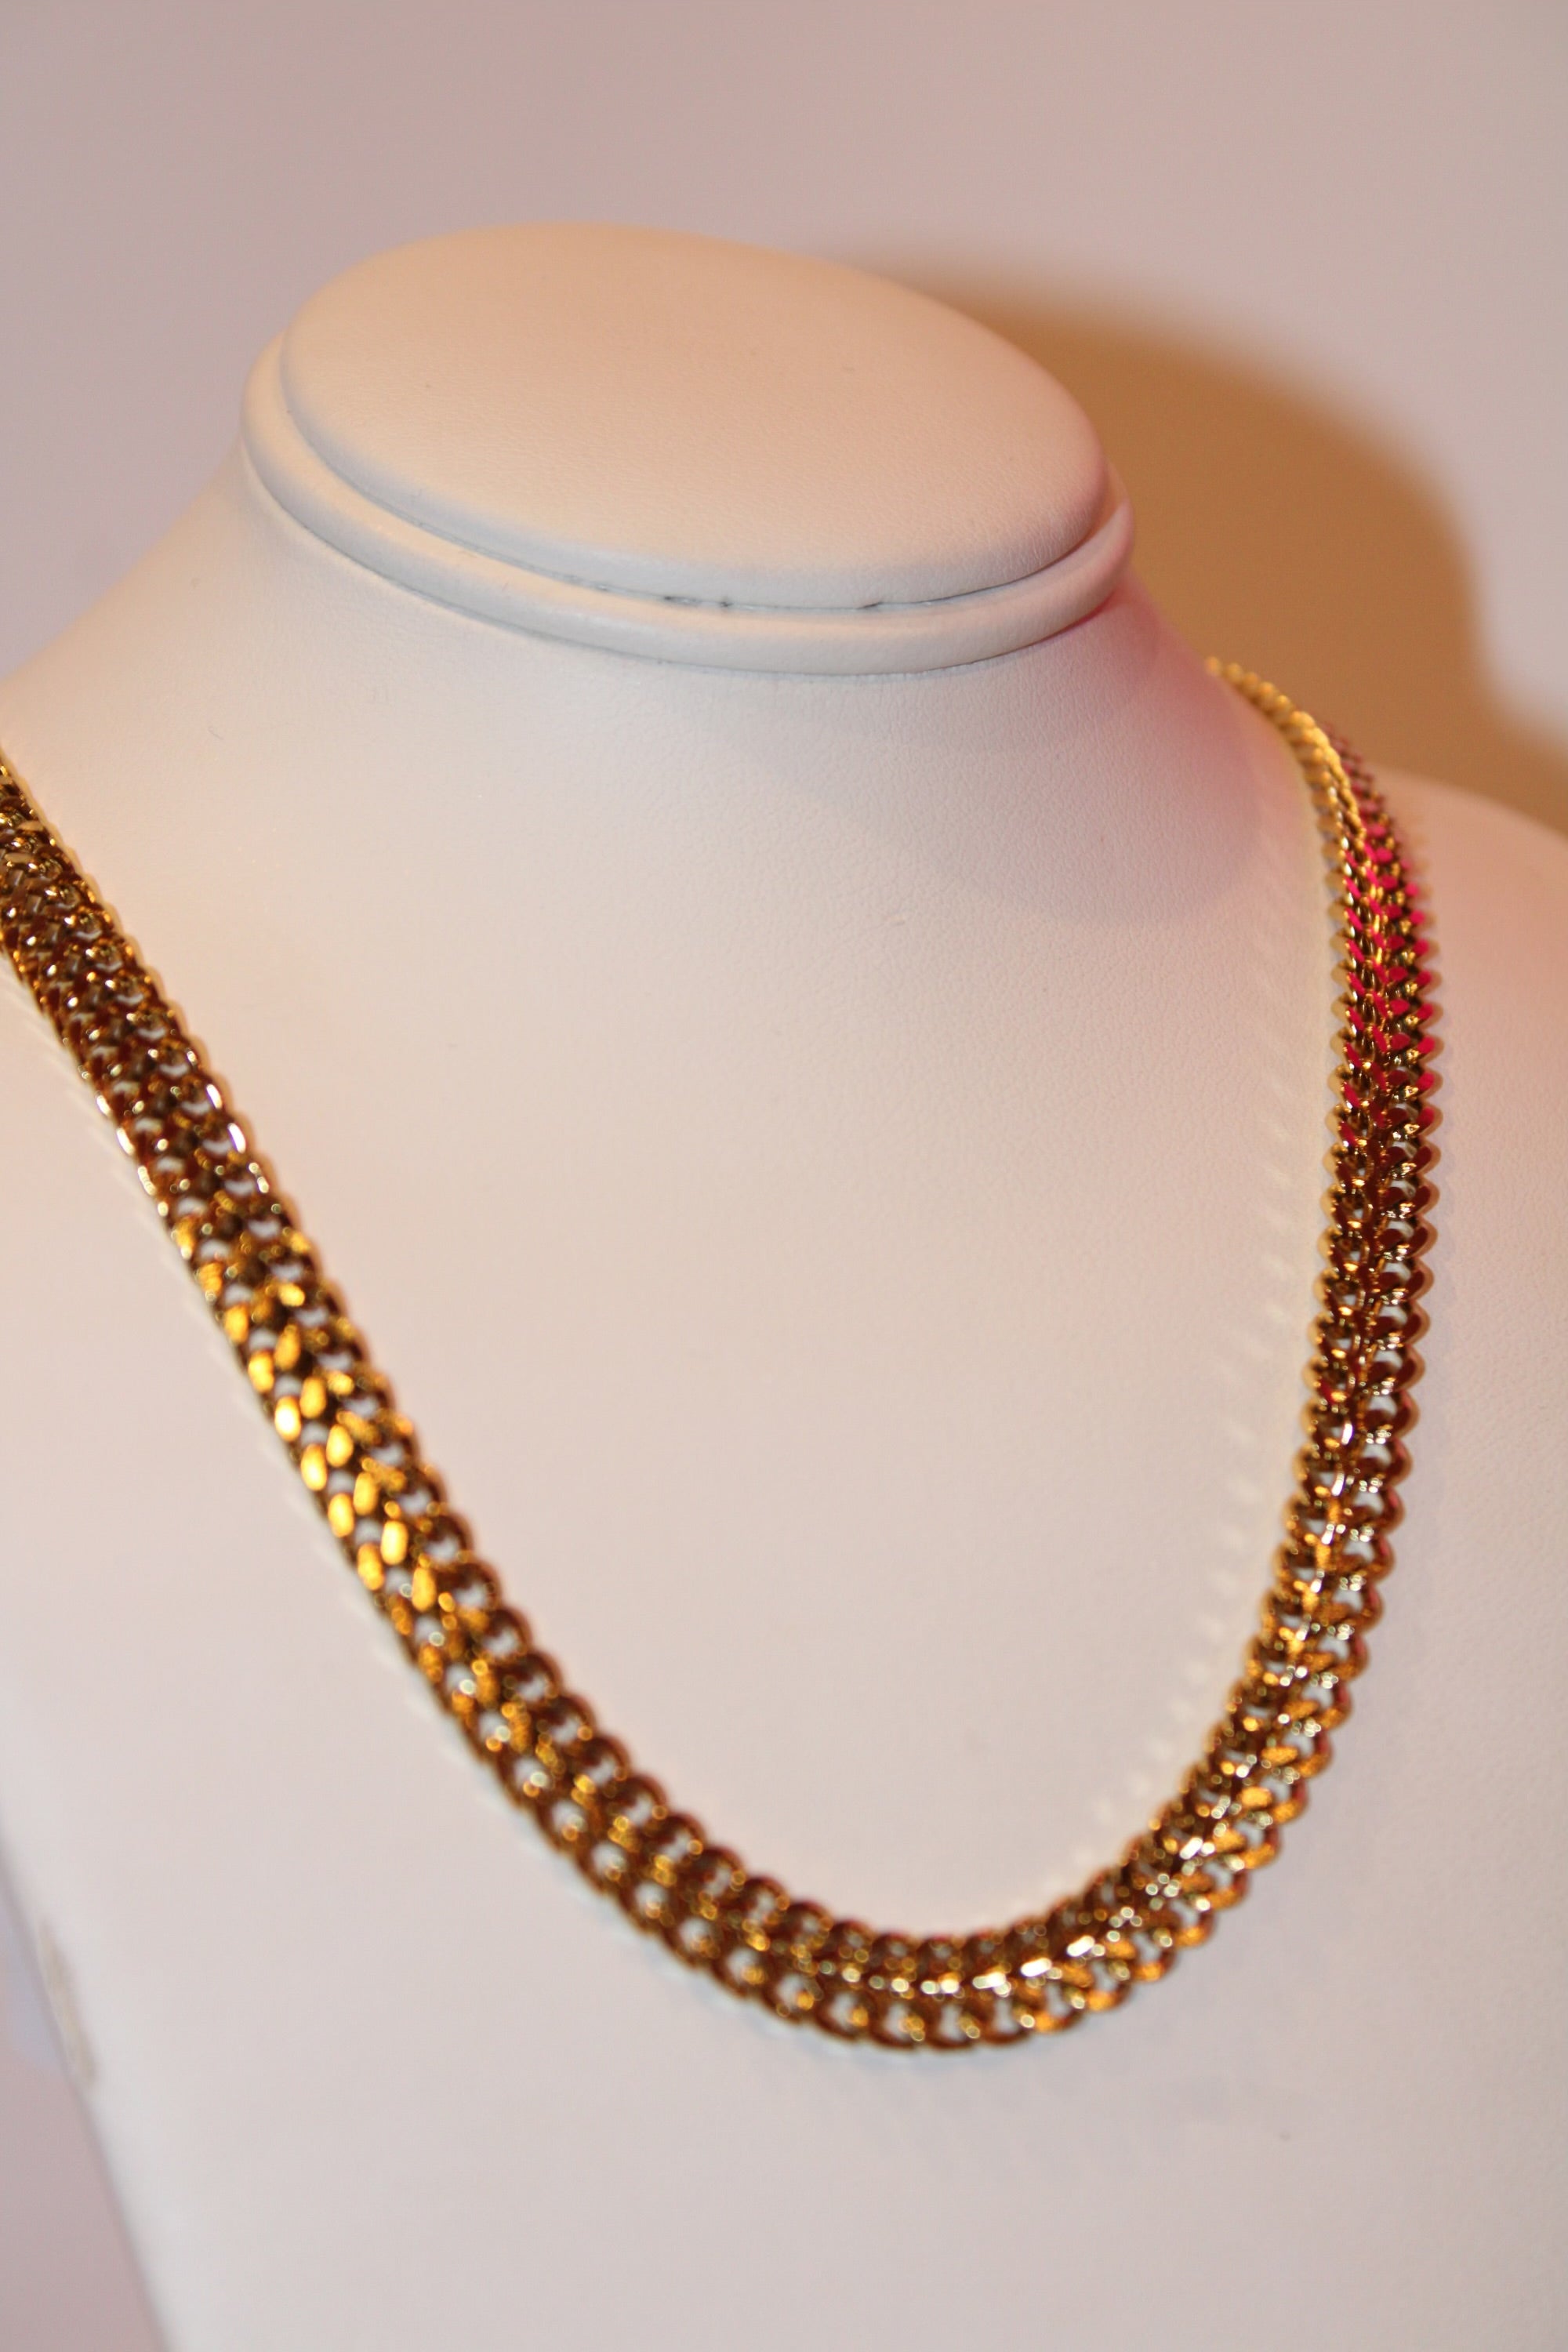 SIMPLE LAYER STYLE NECKLACE - WATER RESISTANT